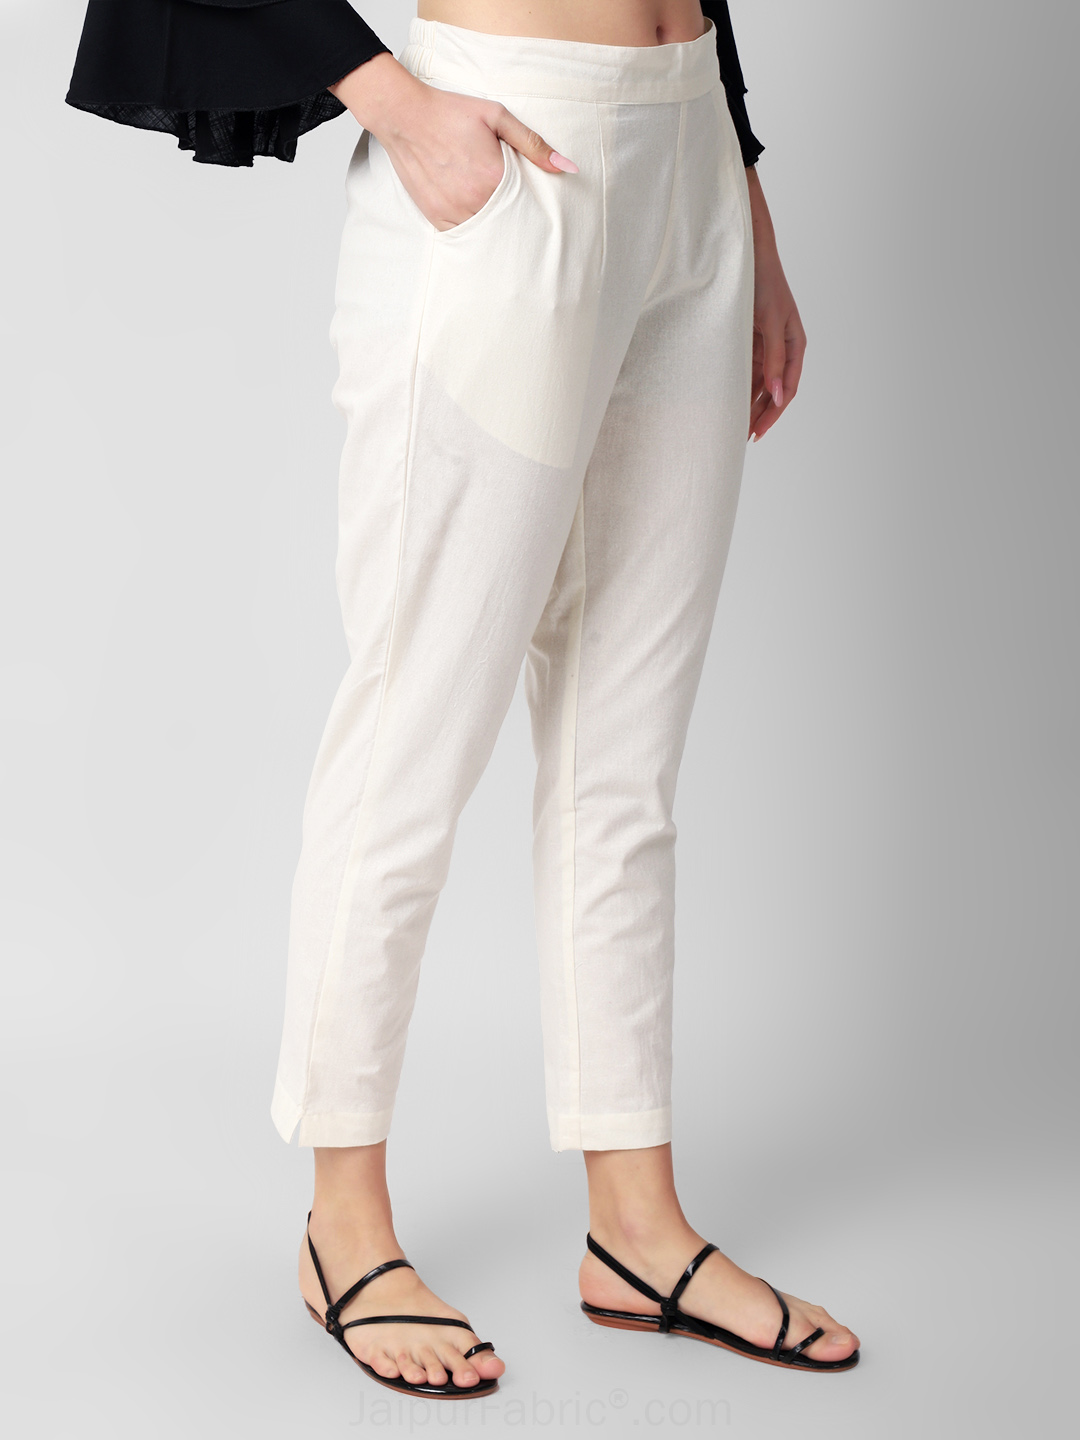 Pearl Glow Women Cotton Pants casual and semi formal daily trousers